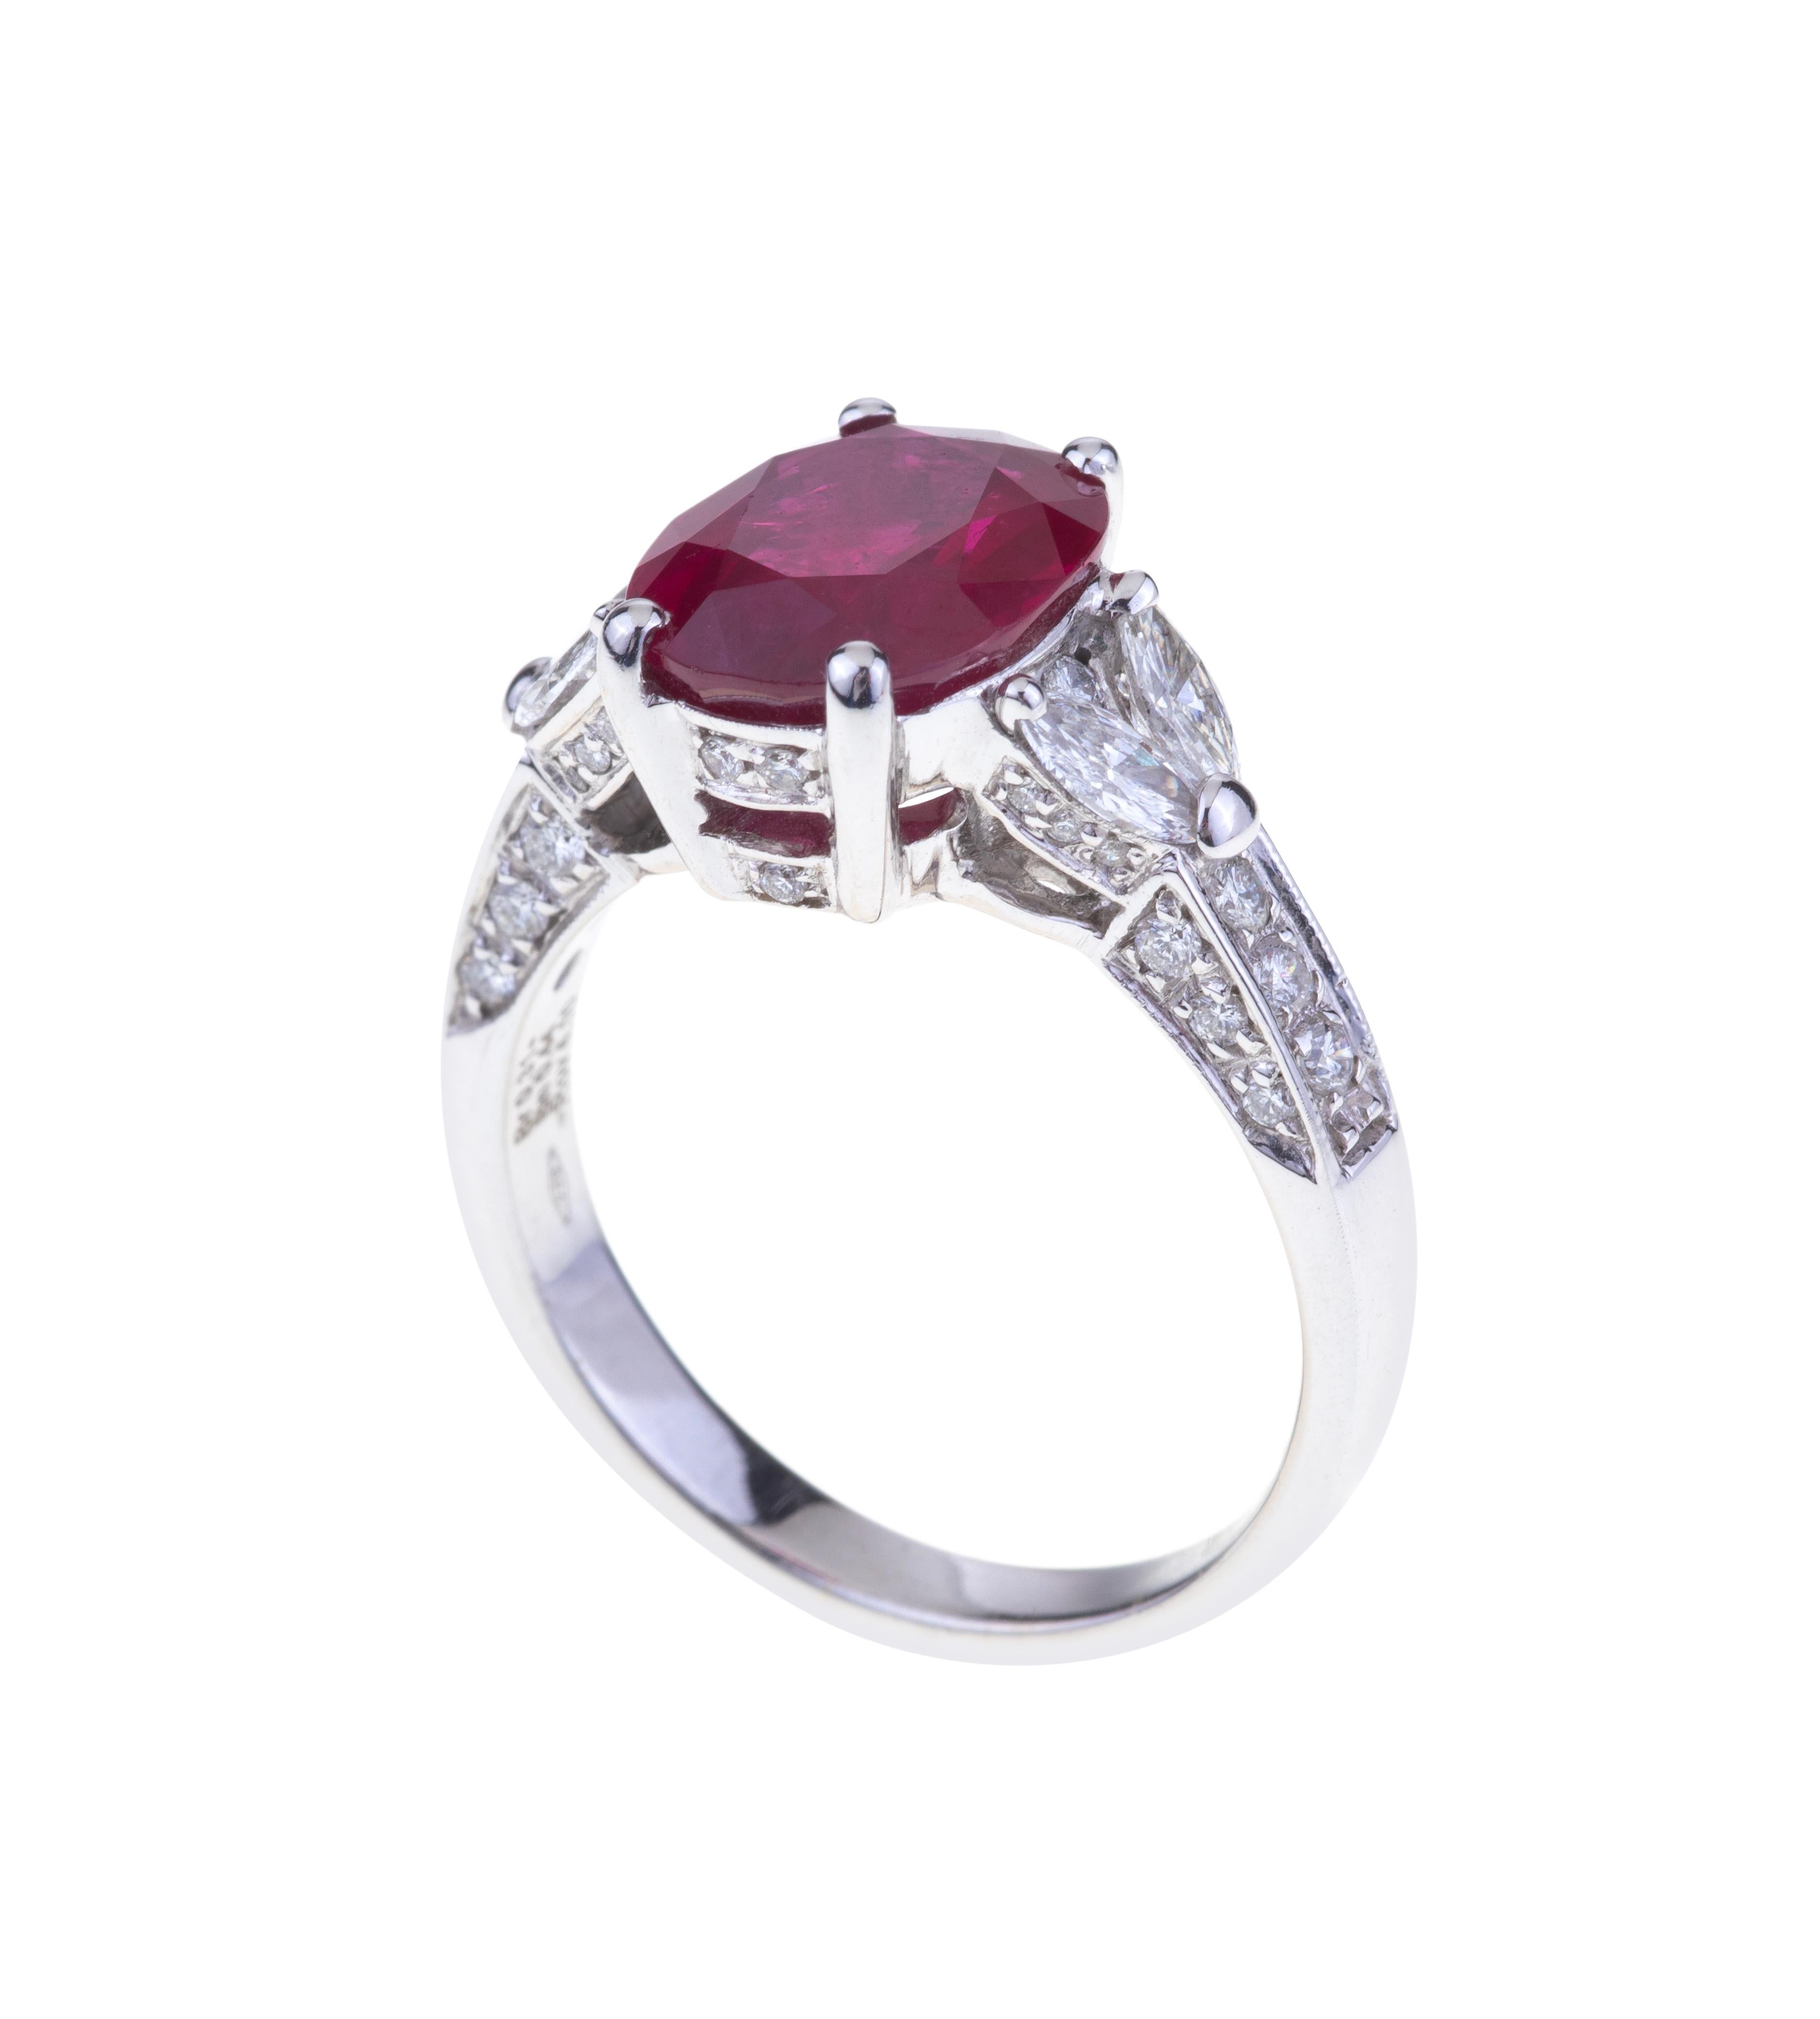 Oval Cut Stunning Oval Ruby Ring ct. 4.10 with Diamonds. Unique Stone. For Sale